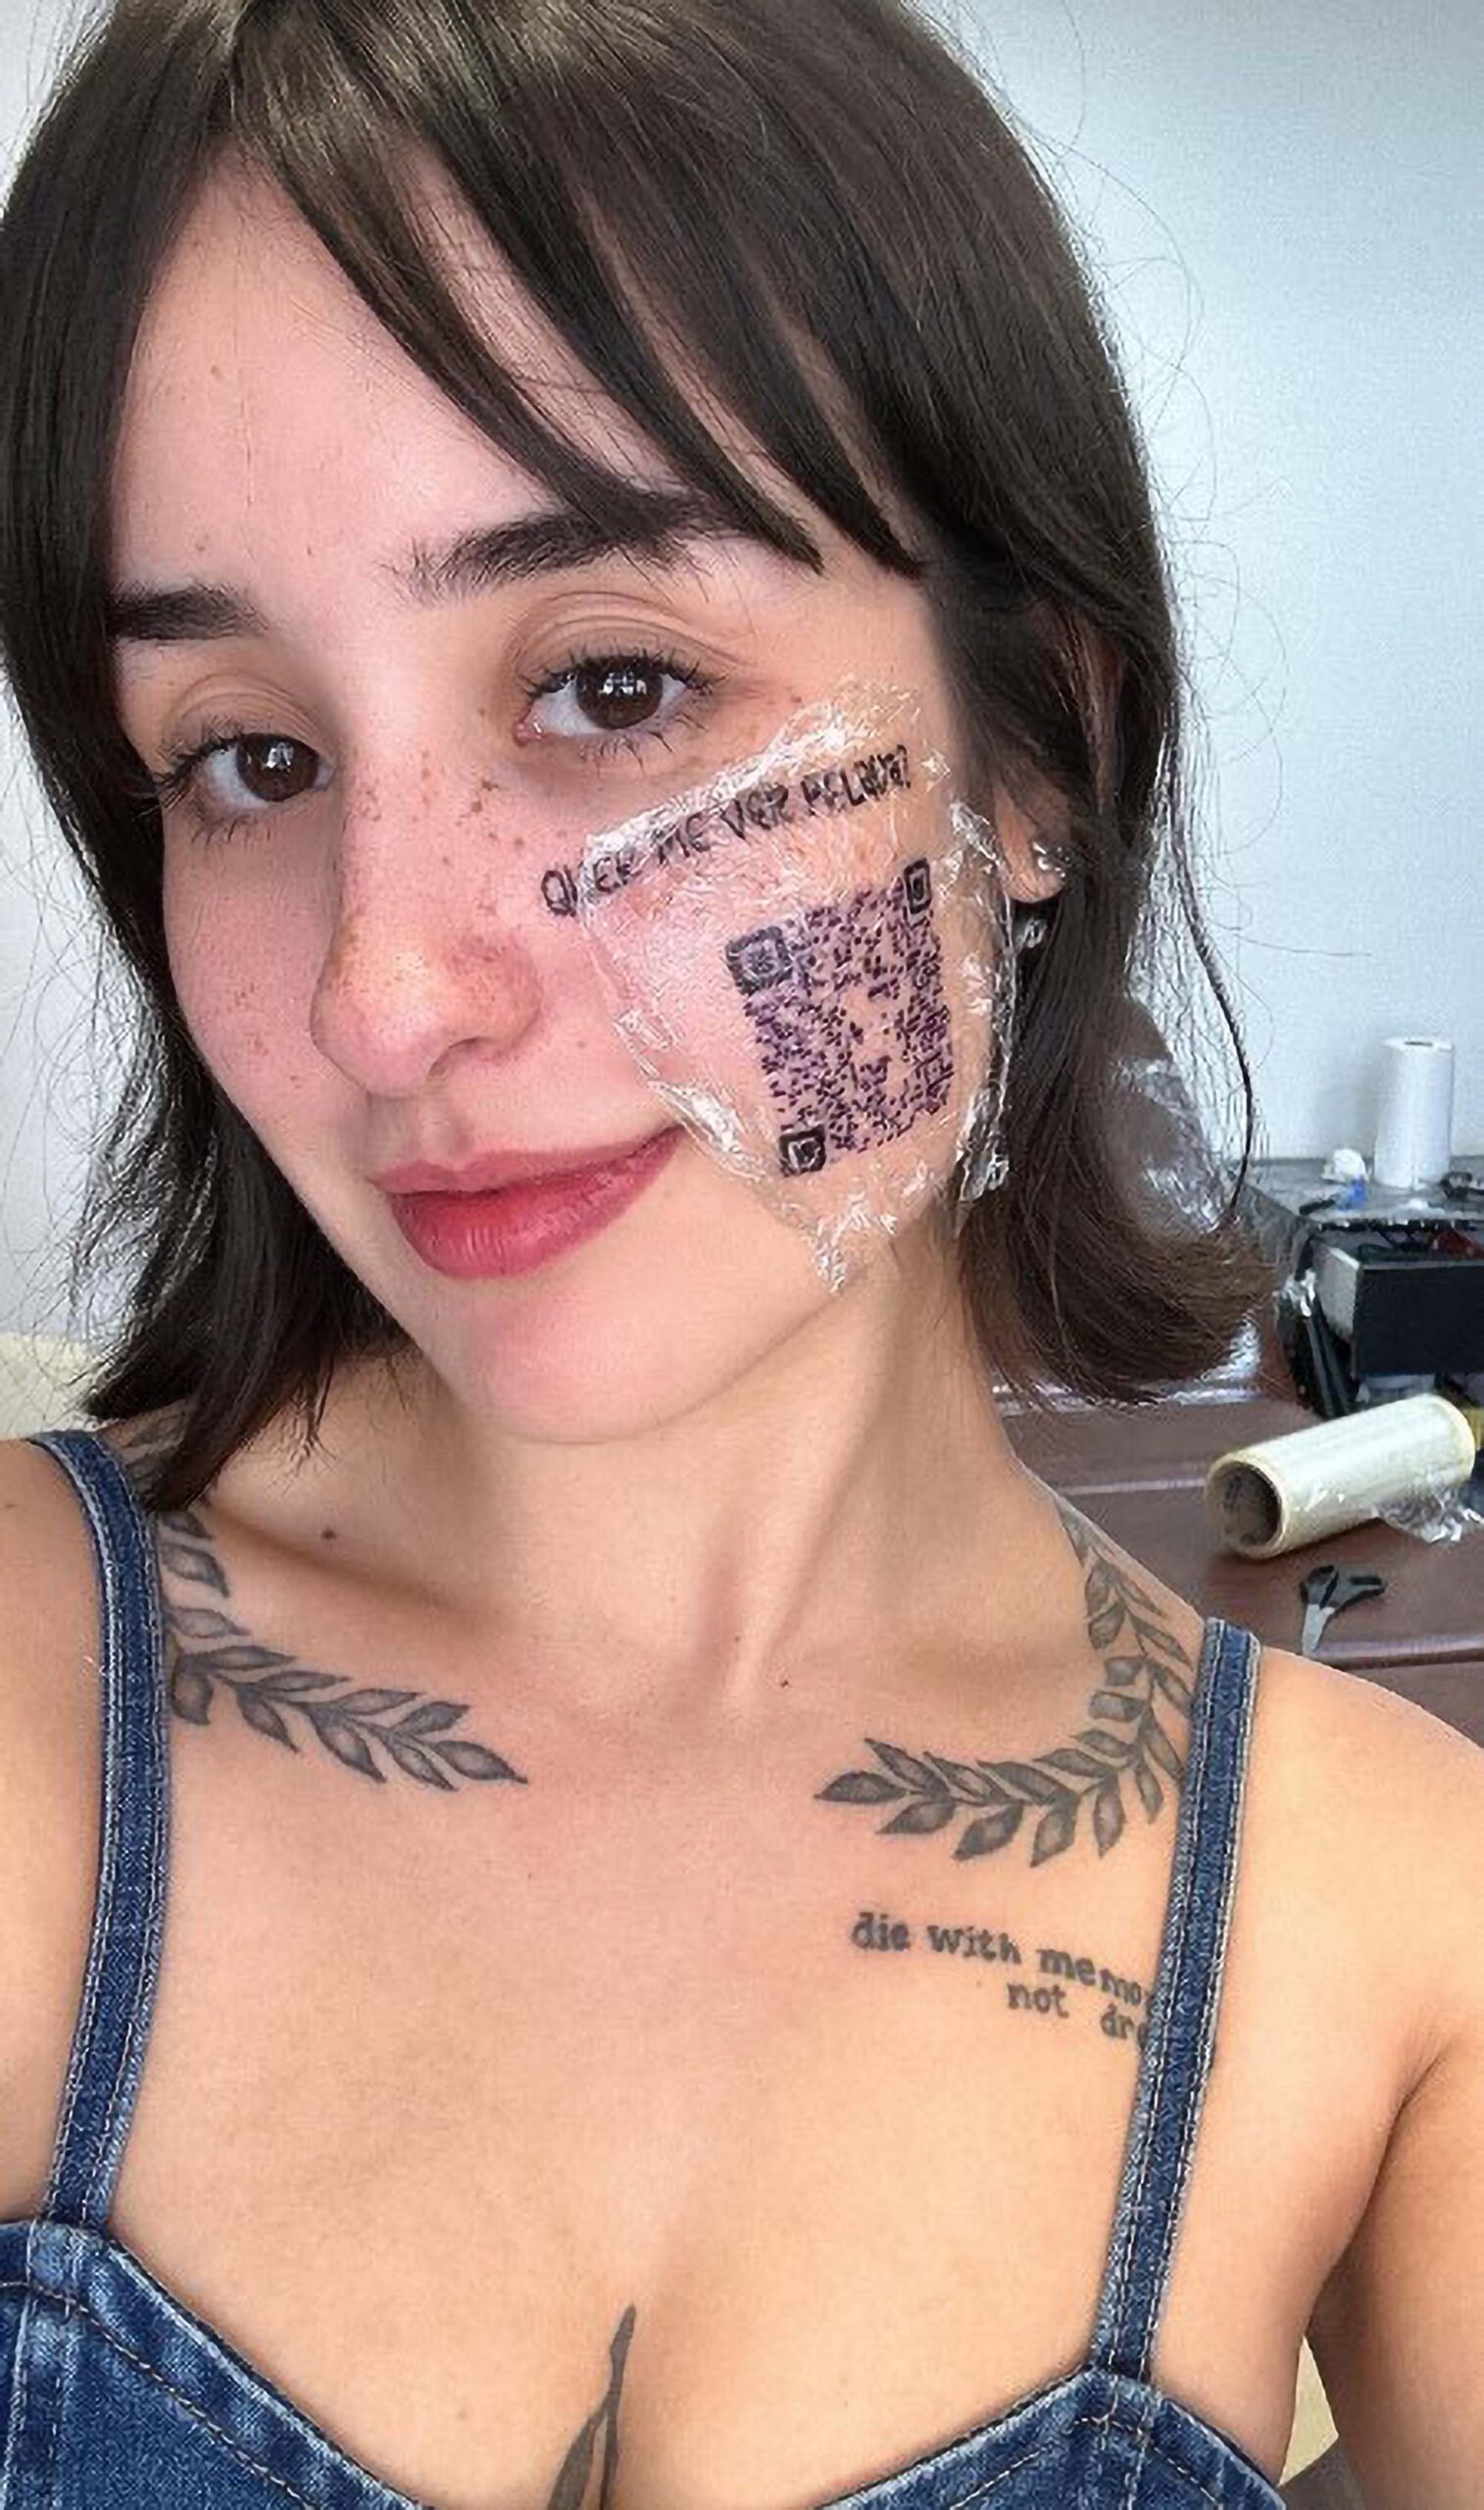 Read more about the article OnlyFans Star Has Erotic QR Code Tattooed On Her Face